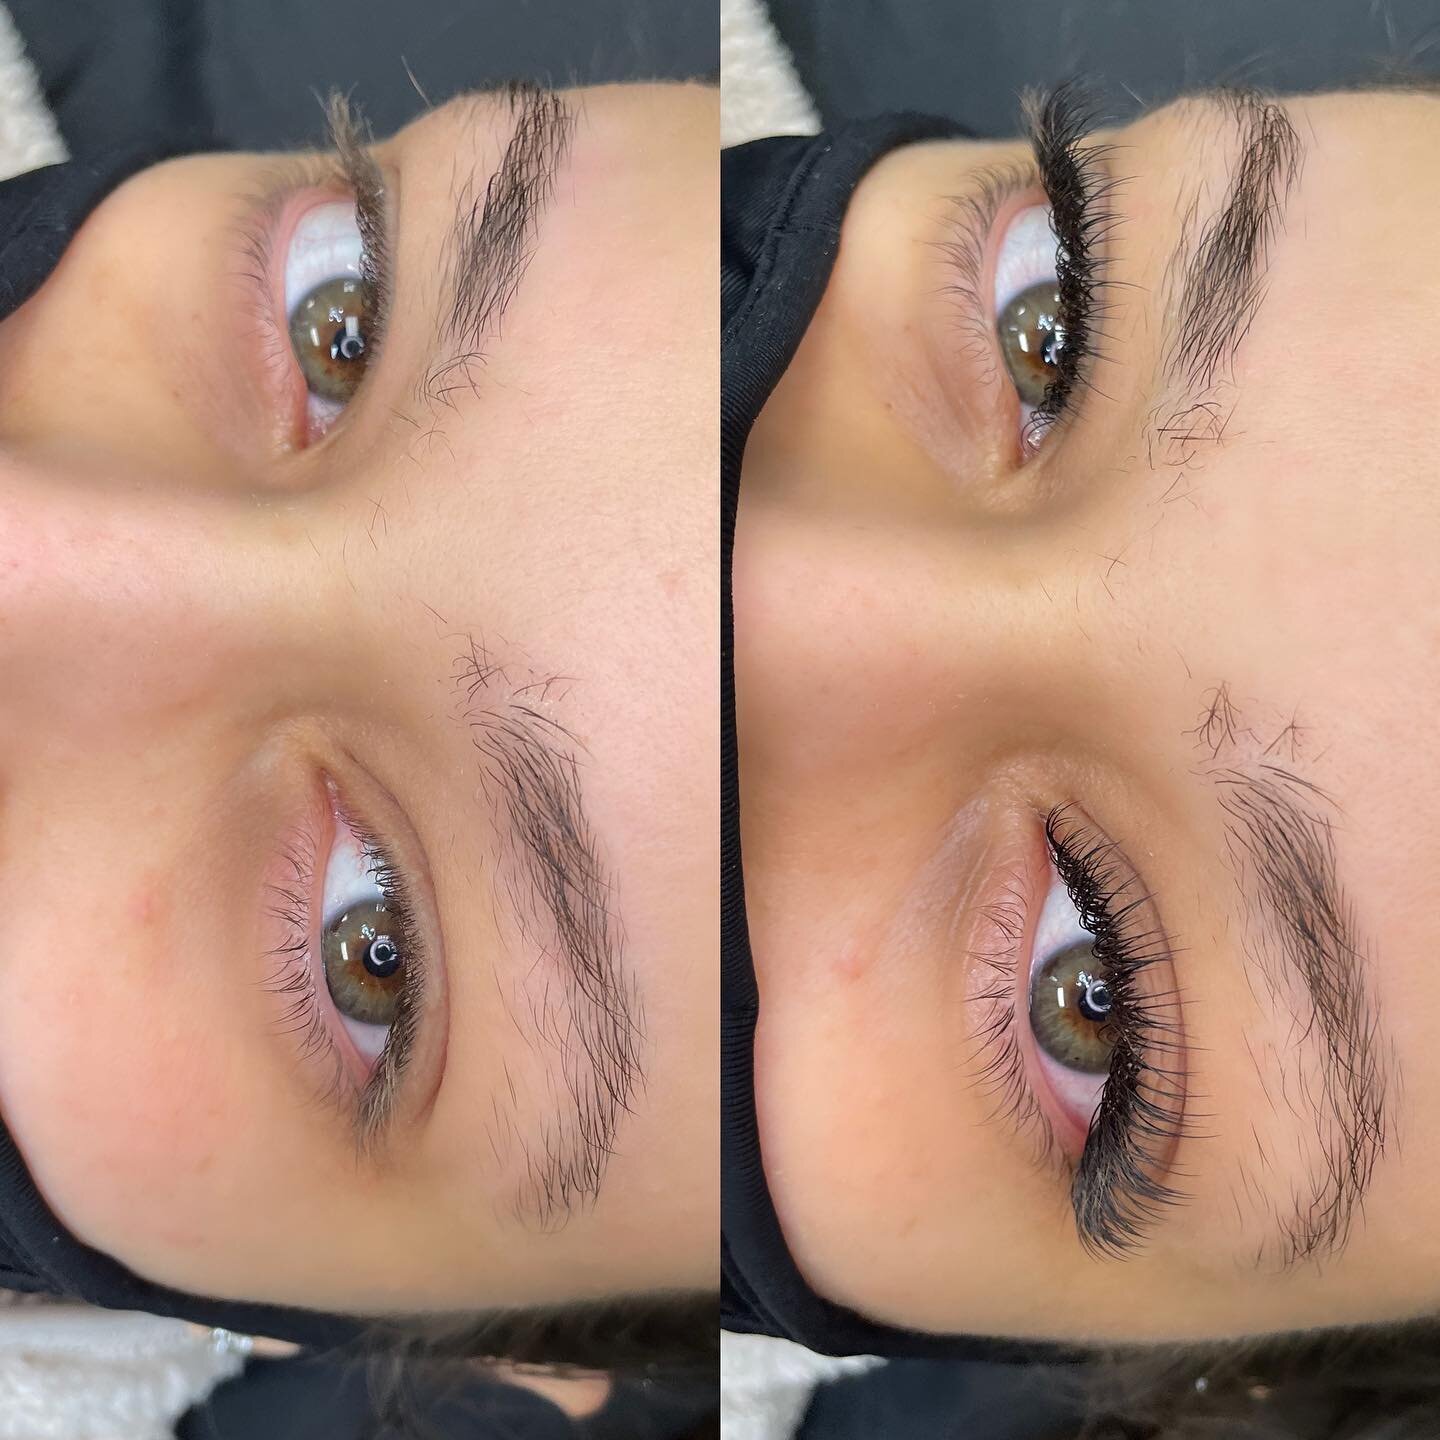 Classic Lash Set 🦋
✨New clients receive $20 off first lash set|$10 off lift &amp; tint|$5 off brow wax &amp; tint✨
.
.
Call (732) 970-4390 to book 
Or visit our website to book anytime! (Link in bio) 
.
.
#volume #volumelashes #hybridlashes #lashext